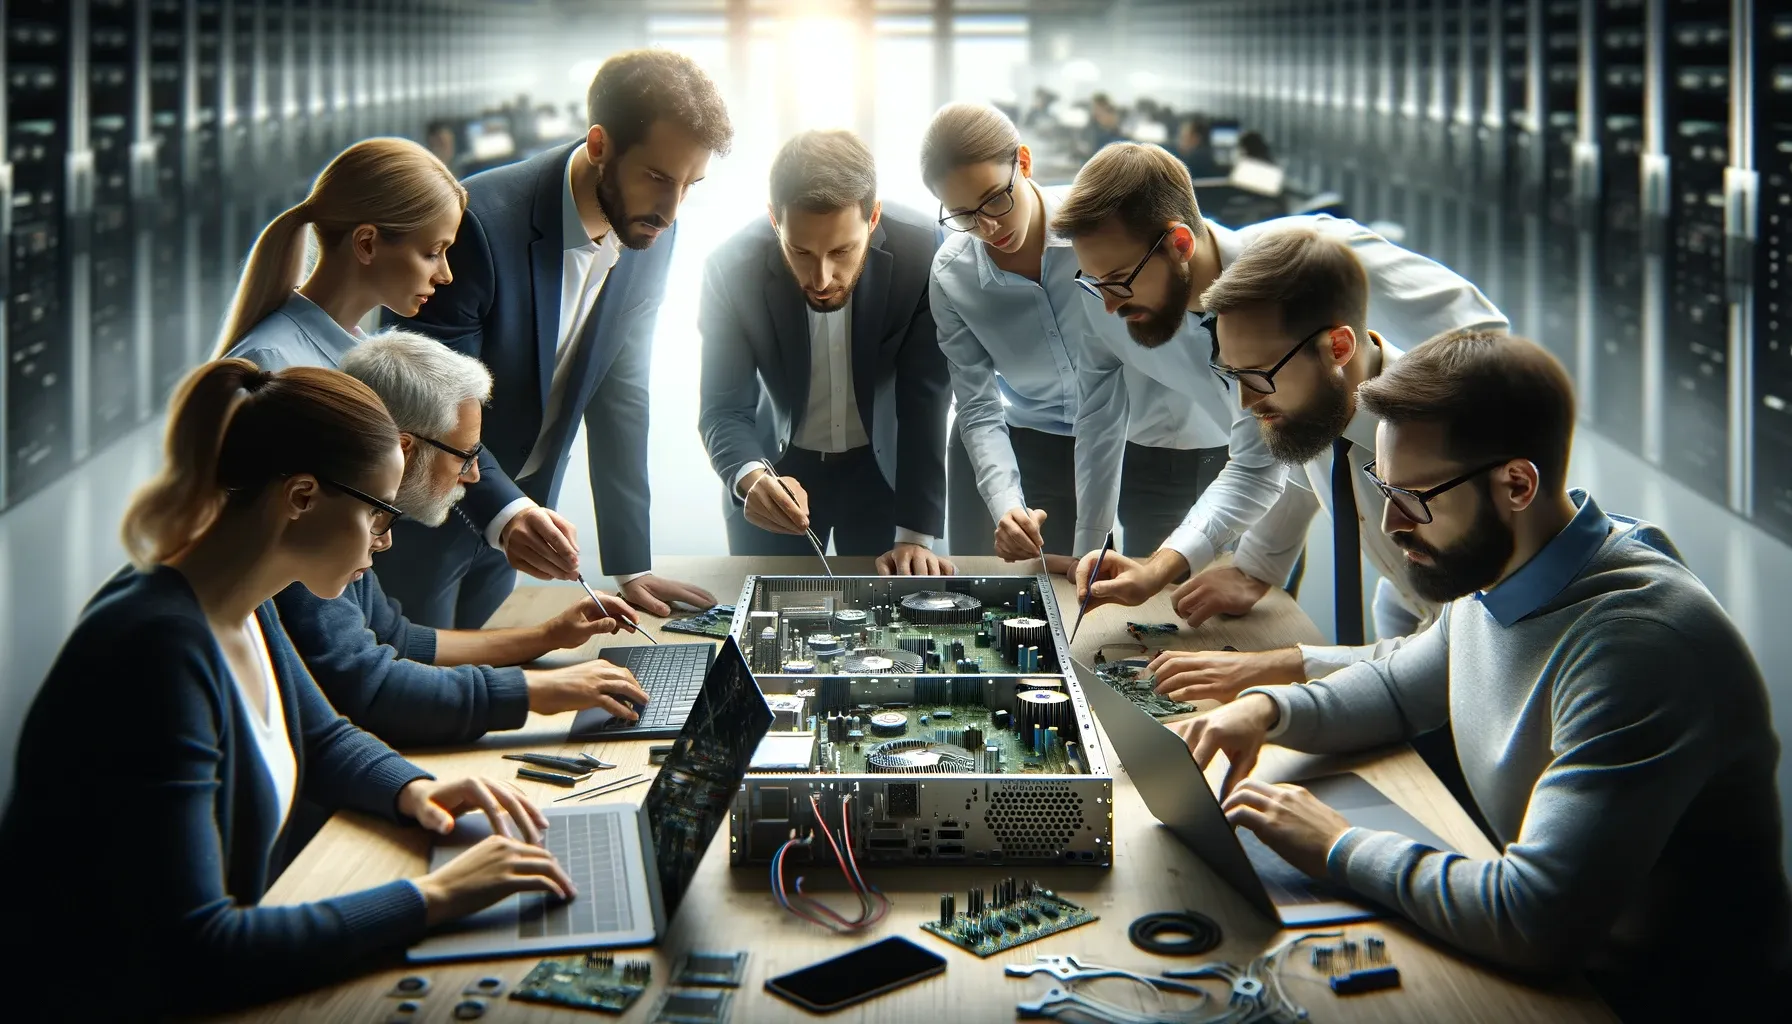 Team of IT professionals working together on computer hardware in a server room.